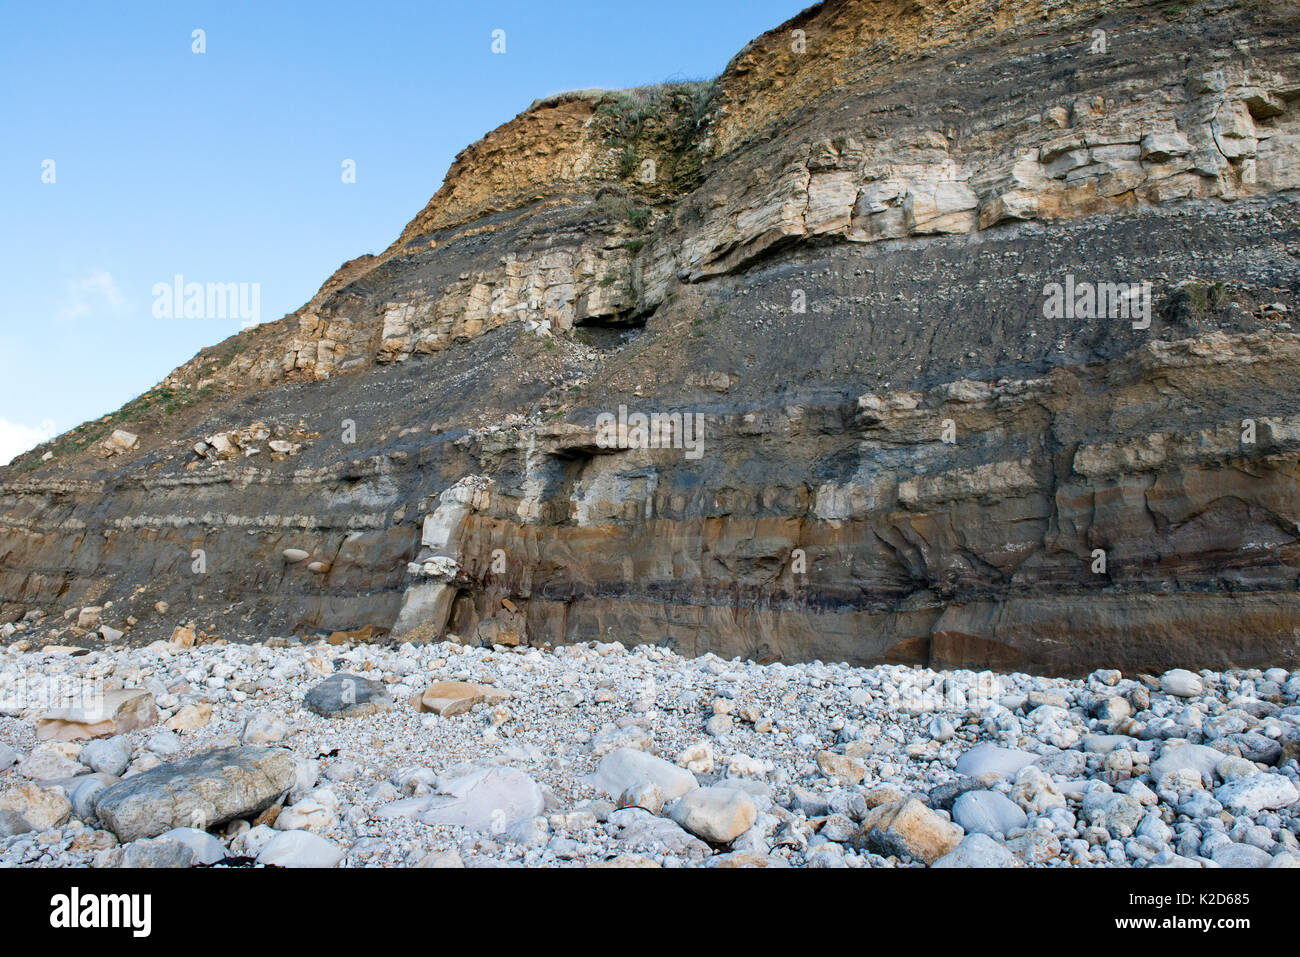 An exposure of the Jurassic, Bencliff Grit at Osmington Mills, Dorset. The sandstones towards the base of the cliffs are coloured brown due to the presence of Hydrocarbon (oil). These oil seeps triggered exploration and development of the nearby Wytch Farm Oilfield. August 2012 Stock Photo